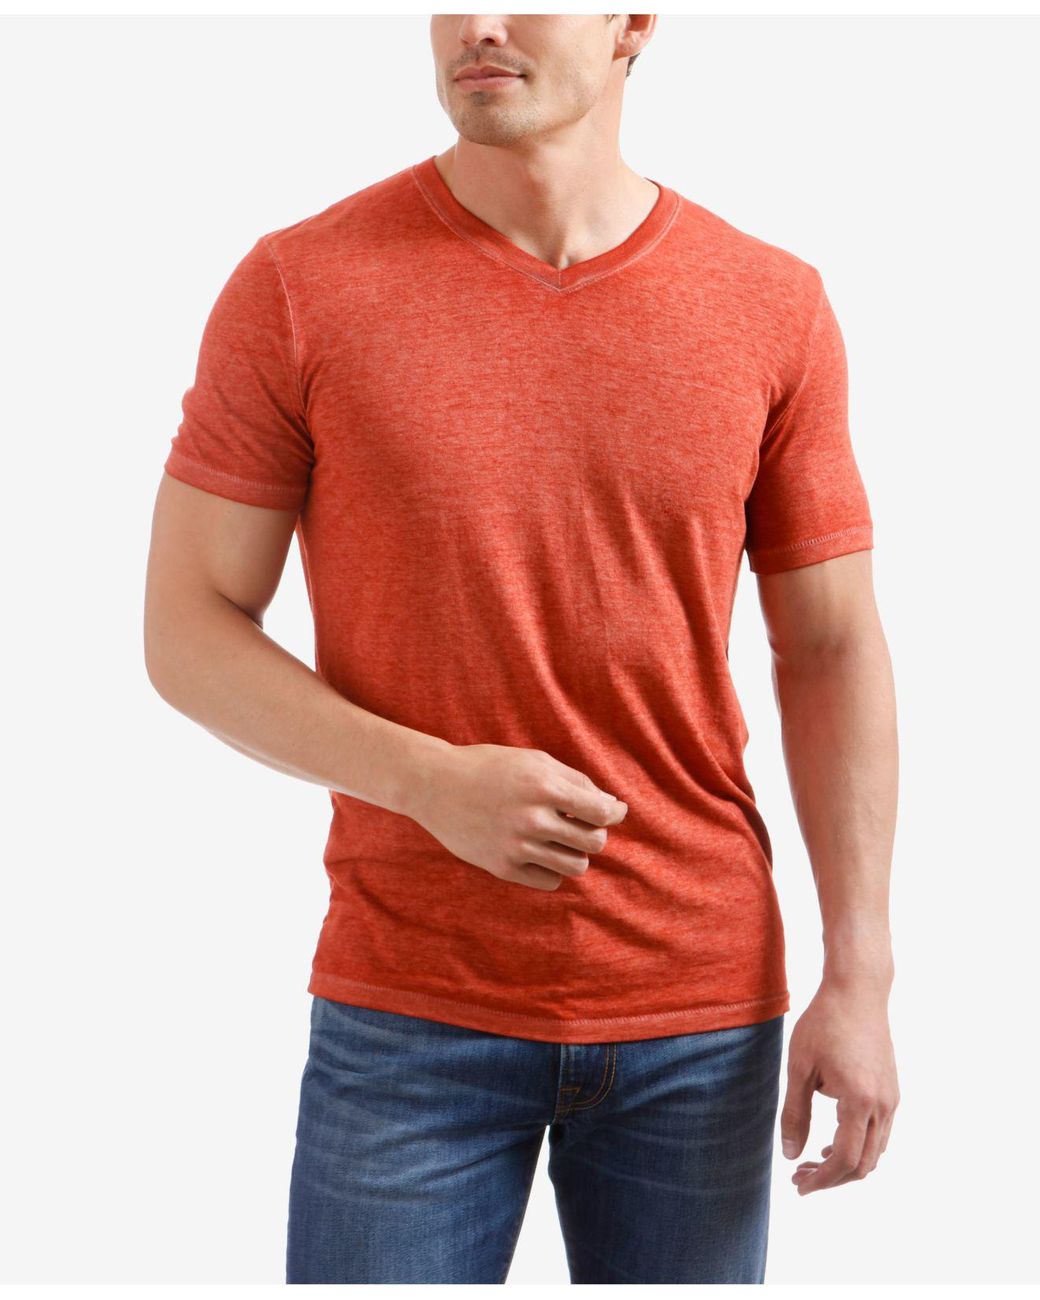 Lucky Brand Synthetic Burnout V-neck T-shirt in Red for Men - Lyst